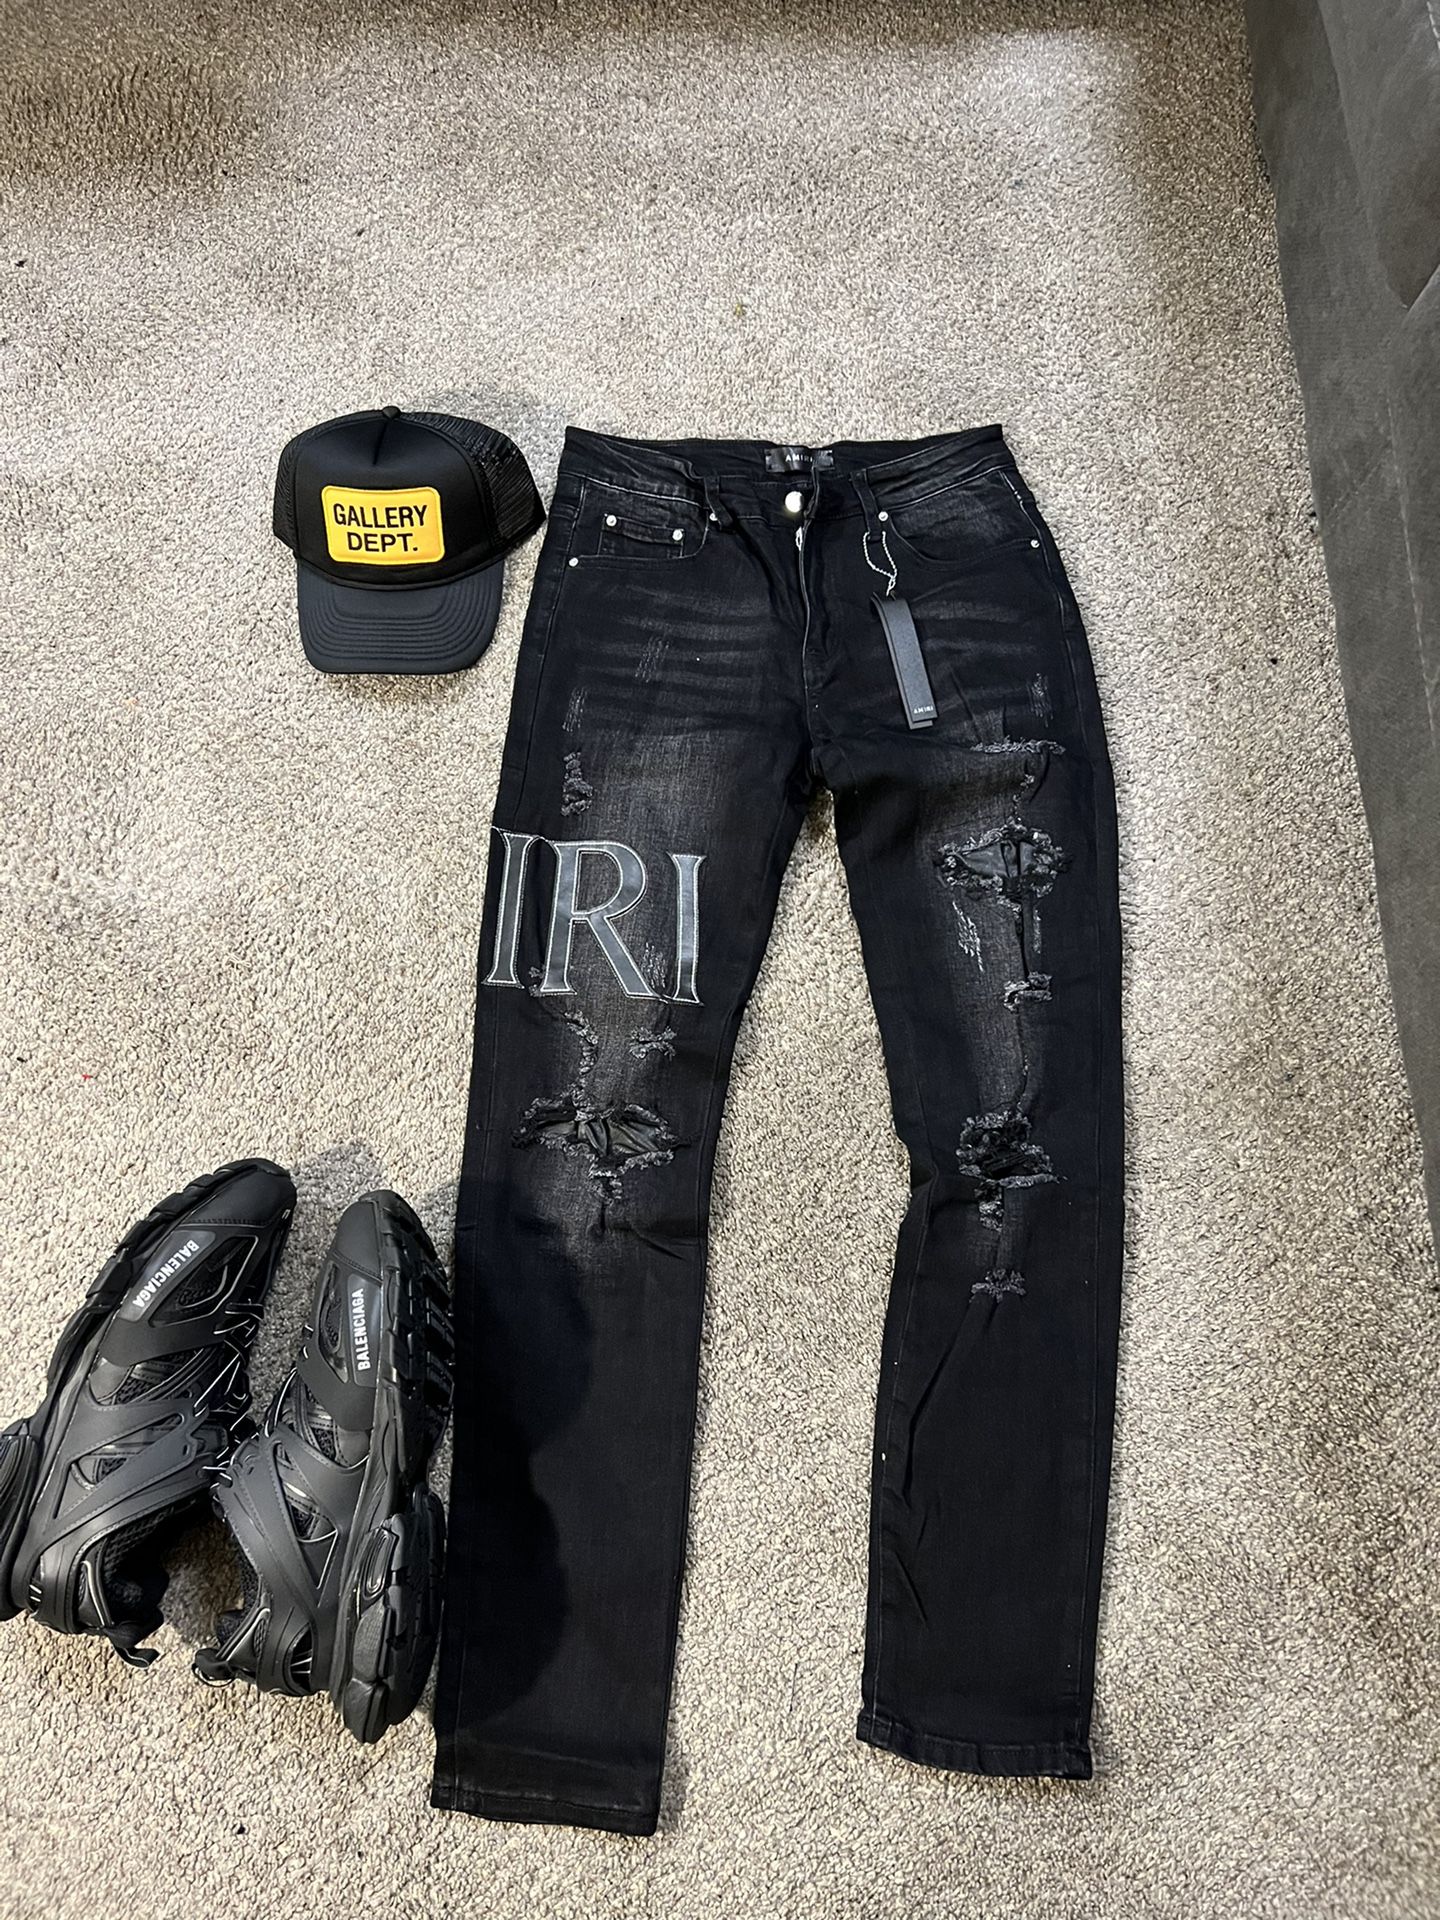 lure Brug for ært Amiri Jeans Size 30,32,33,34 for Sale in Southfield, MI - OfferUp